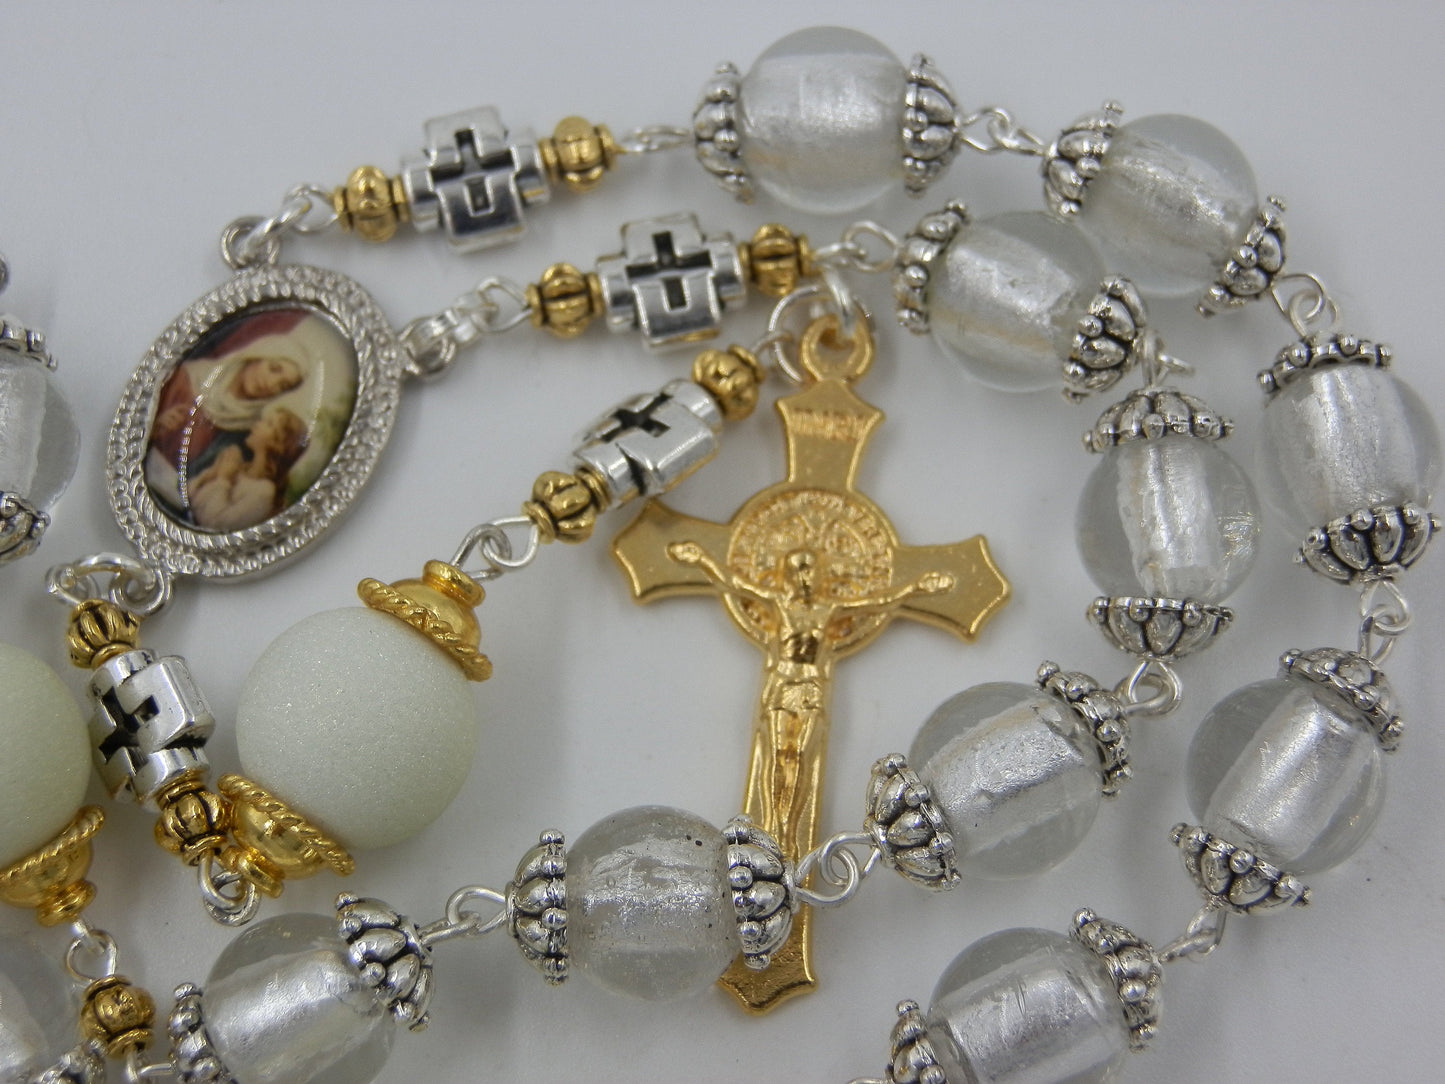 Stunning St. Ann prayer chaplet, Handcrafted glass beads, St. Benedict Crucifix, St. Anne Rosaries, Rosary beads, Heirloom Rosaries.